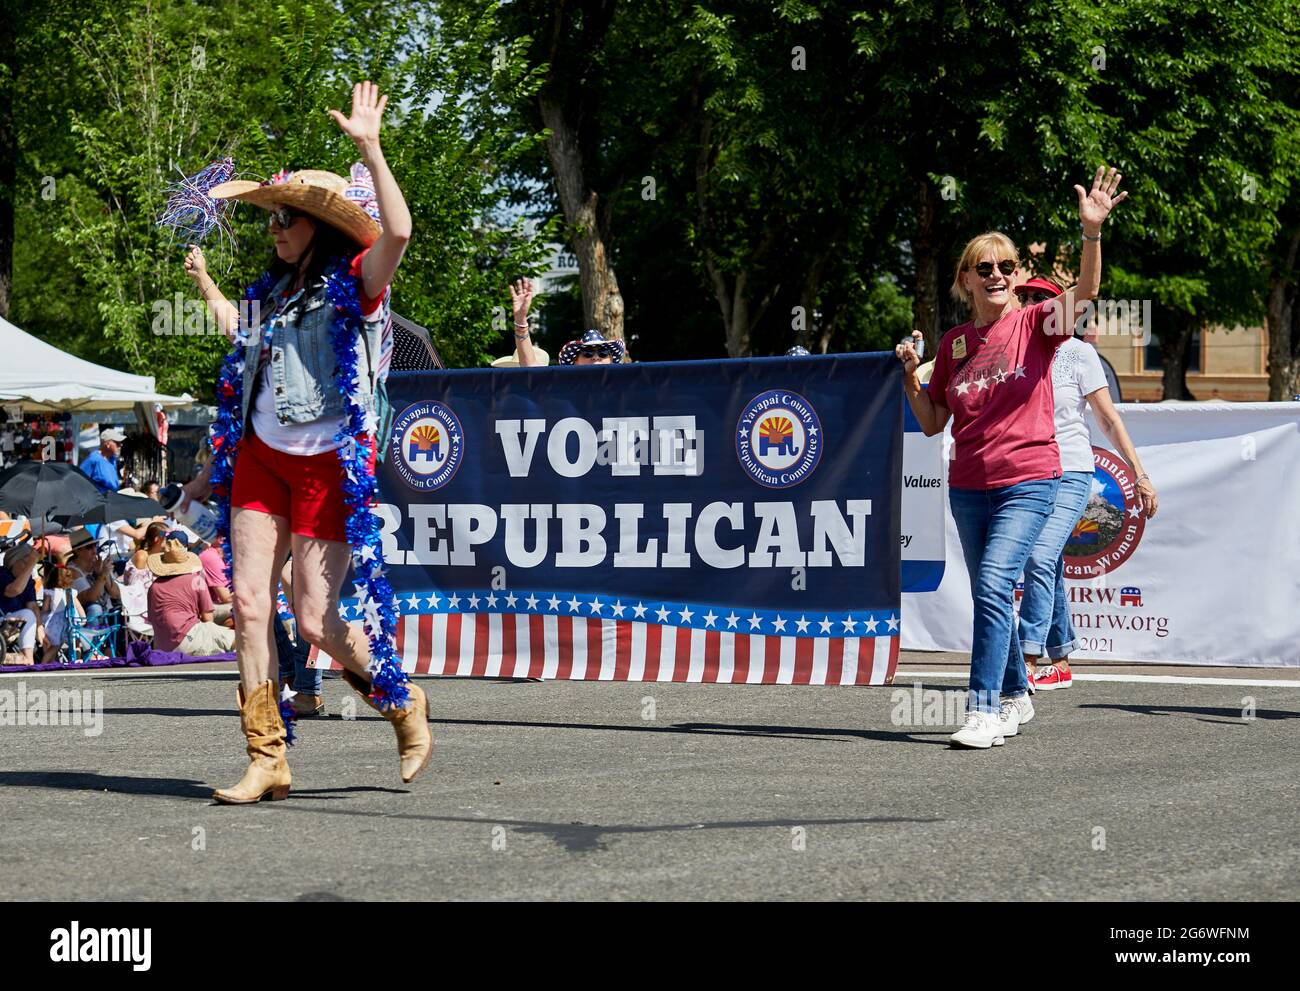 Prescott, Arizona, USA - July 3, 2021: Yavapai County republican party hoding a banner and marching in 4th of July parade Stock Photo